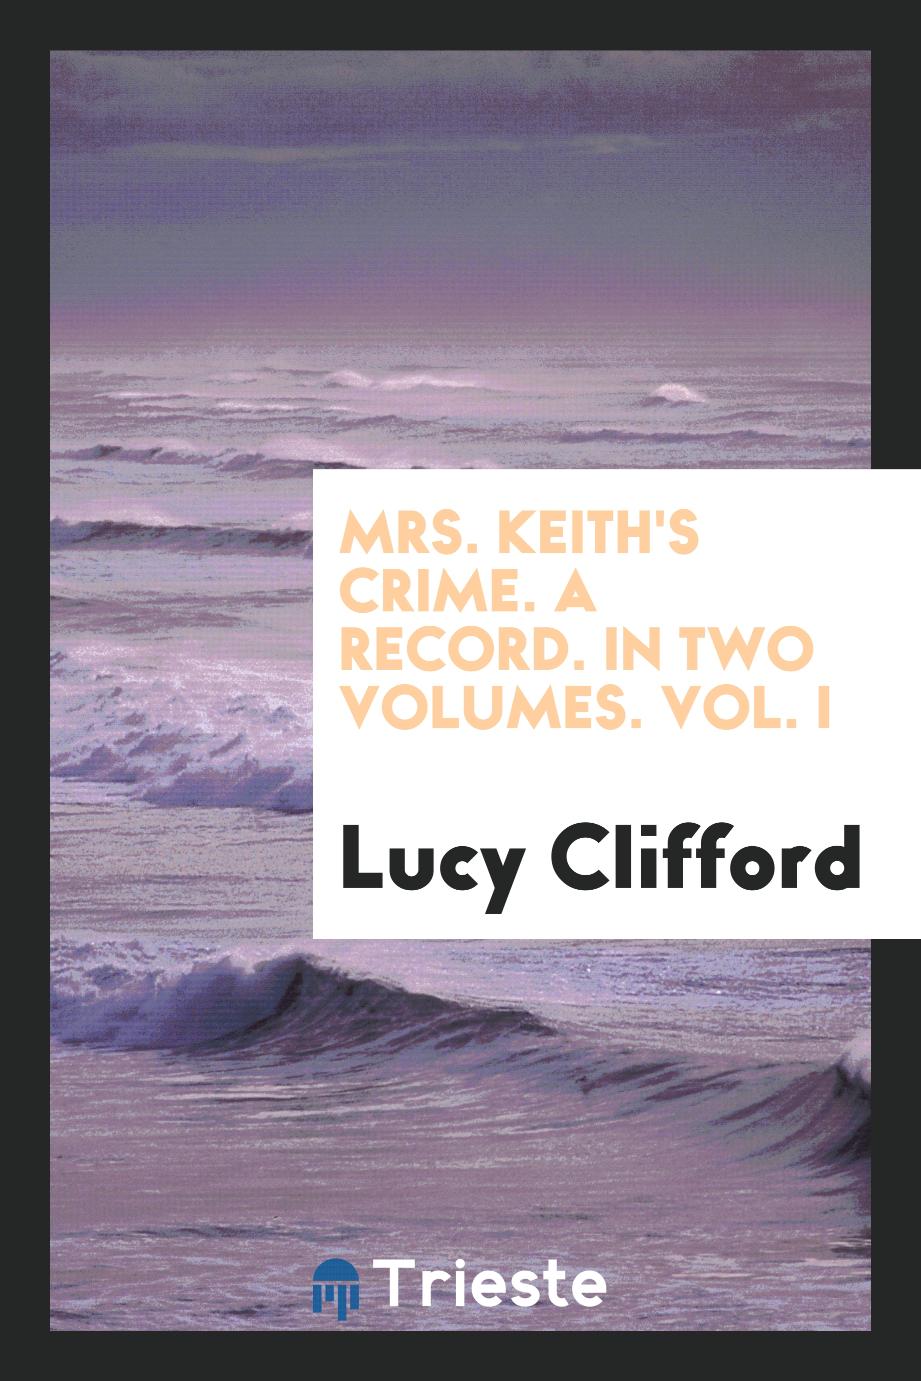 Mrs. Keith's Crime. A Record. In Two Volumes. Vol. I